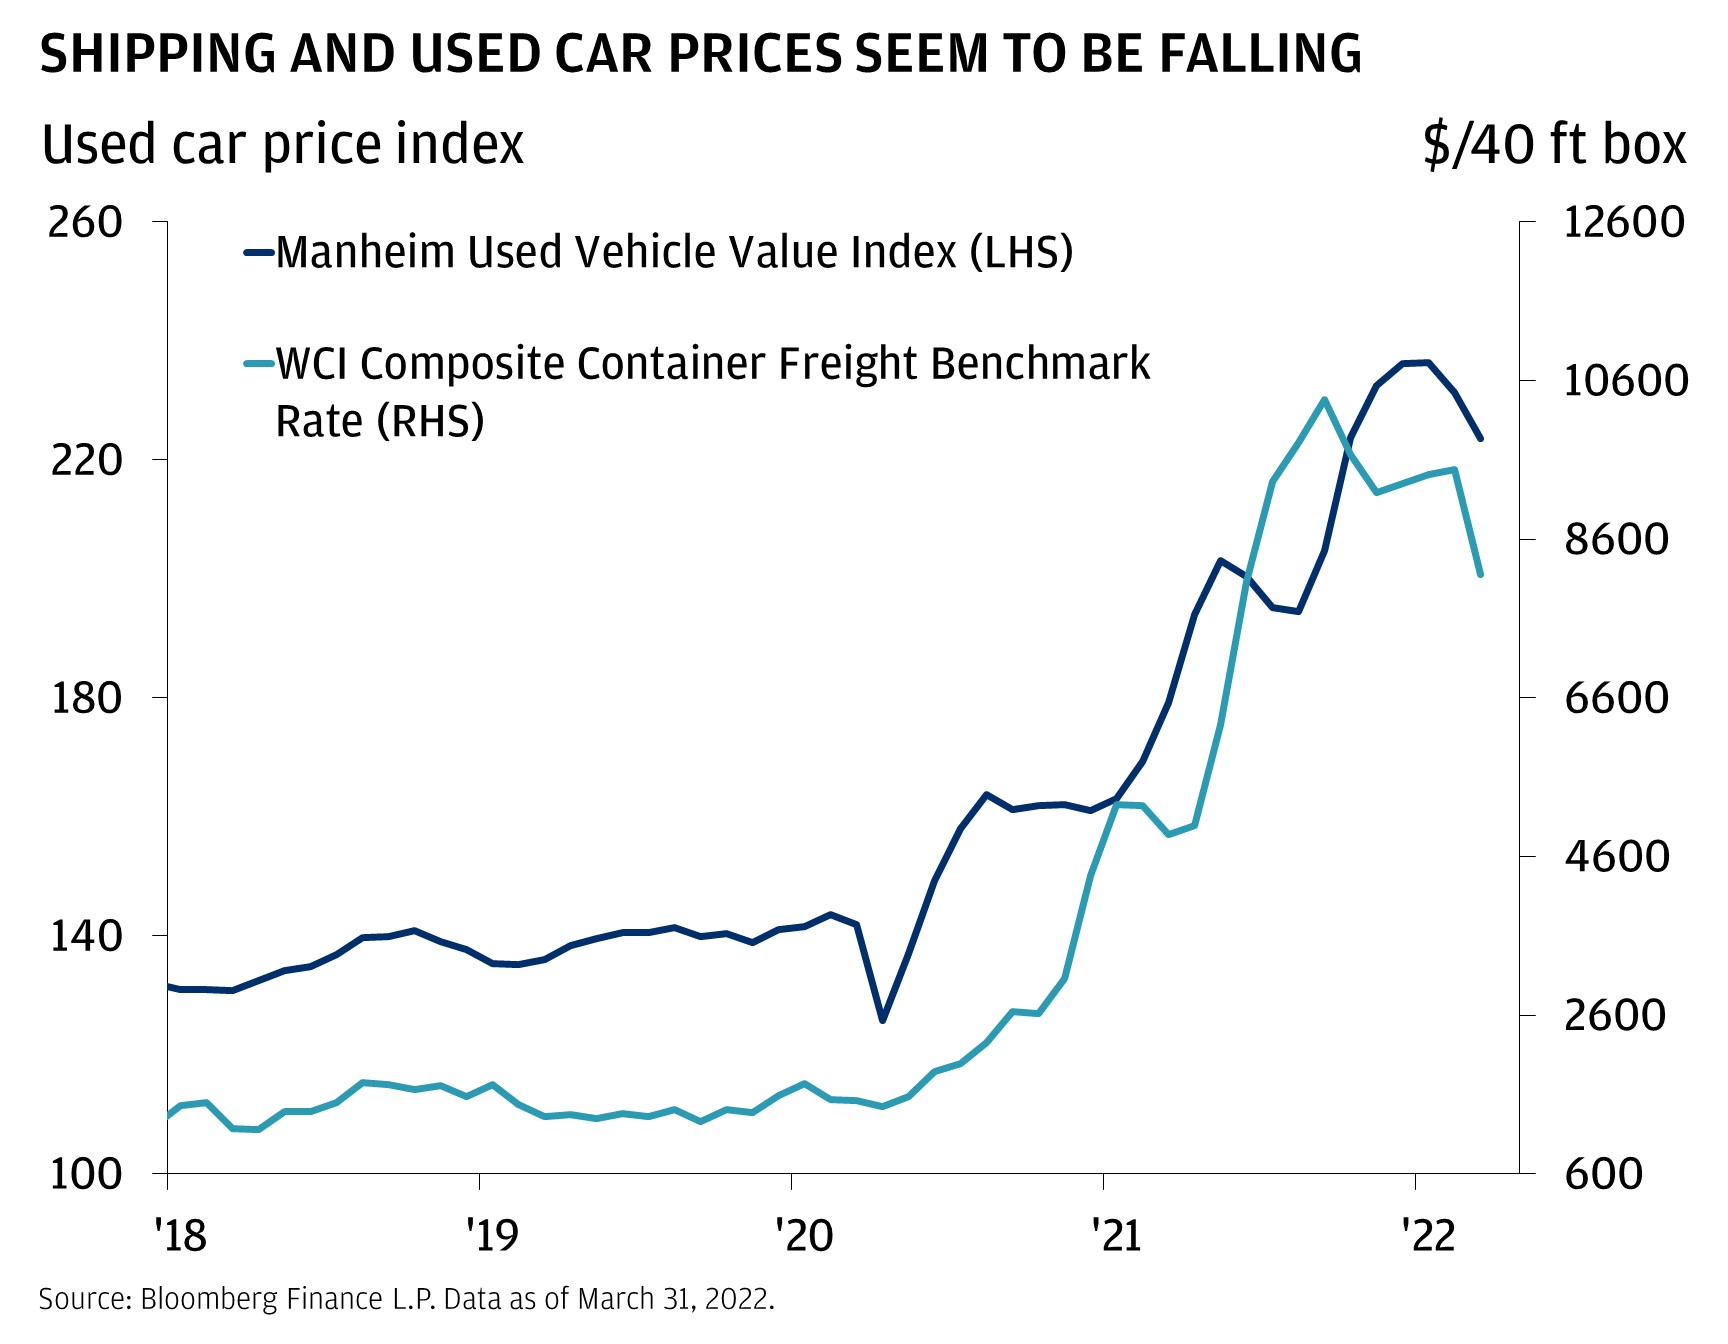 This chart shows the Manheim Used Vehicle Value Index and the WCI Composite Container Freight Benchmark Rate ($/40 ft. box) from 2018 to March 2022.